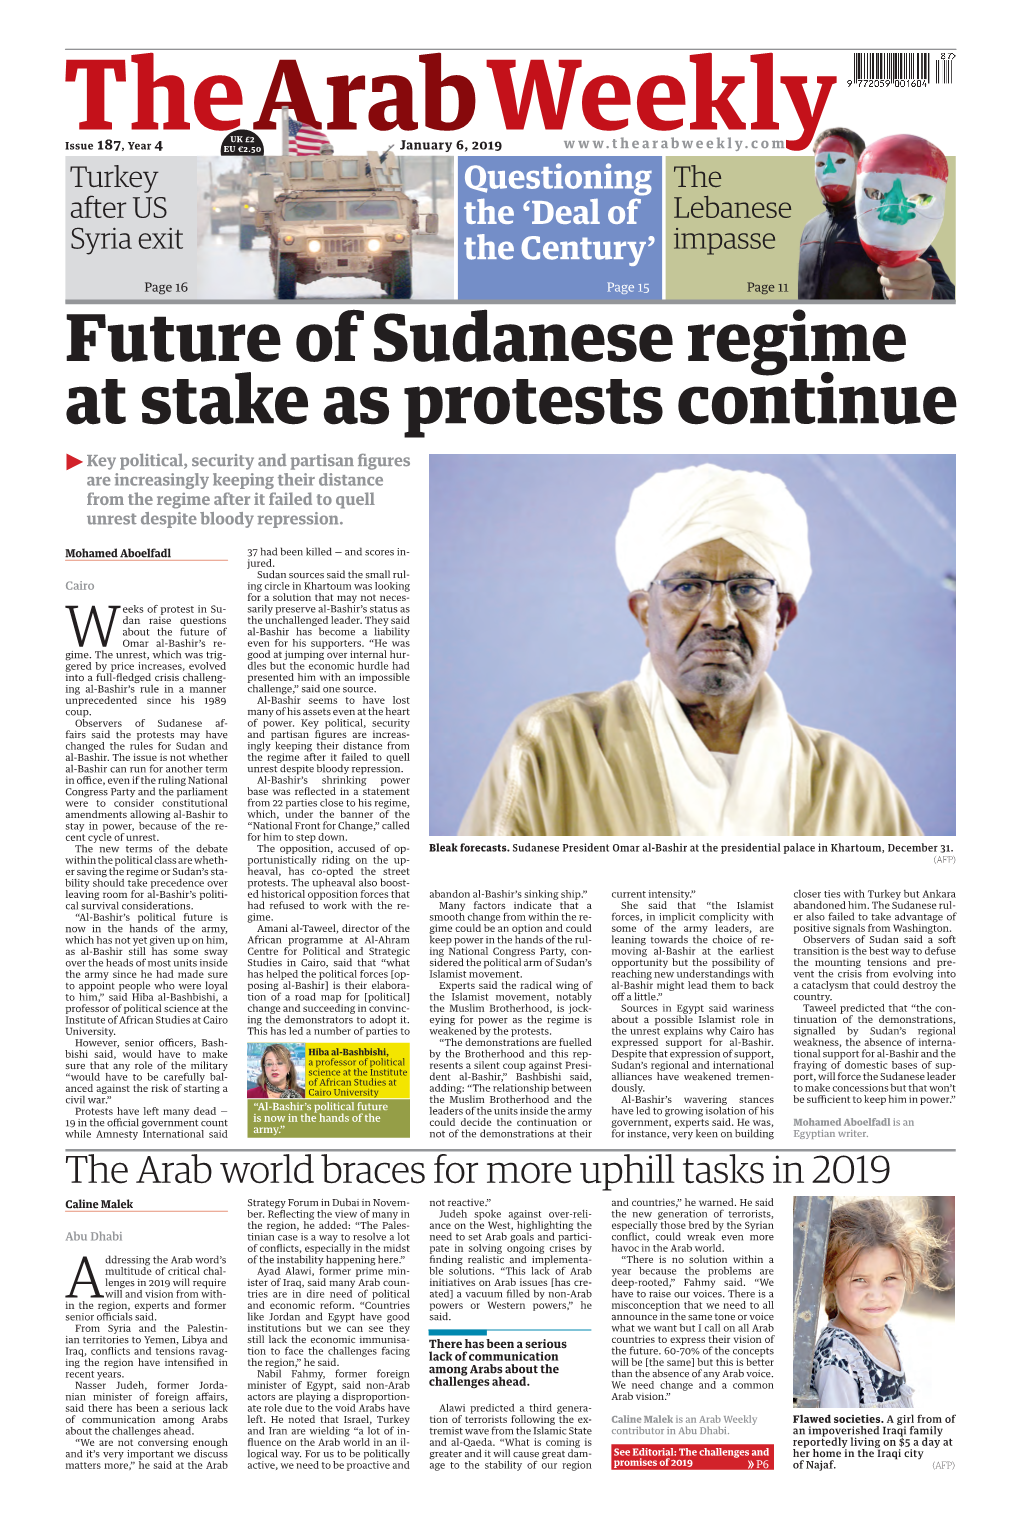 Future of Sudanese Regime at Stake As Protests Continue